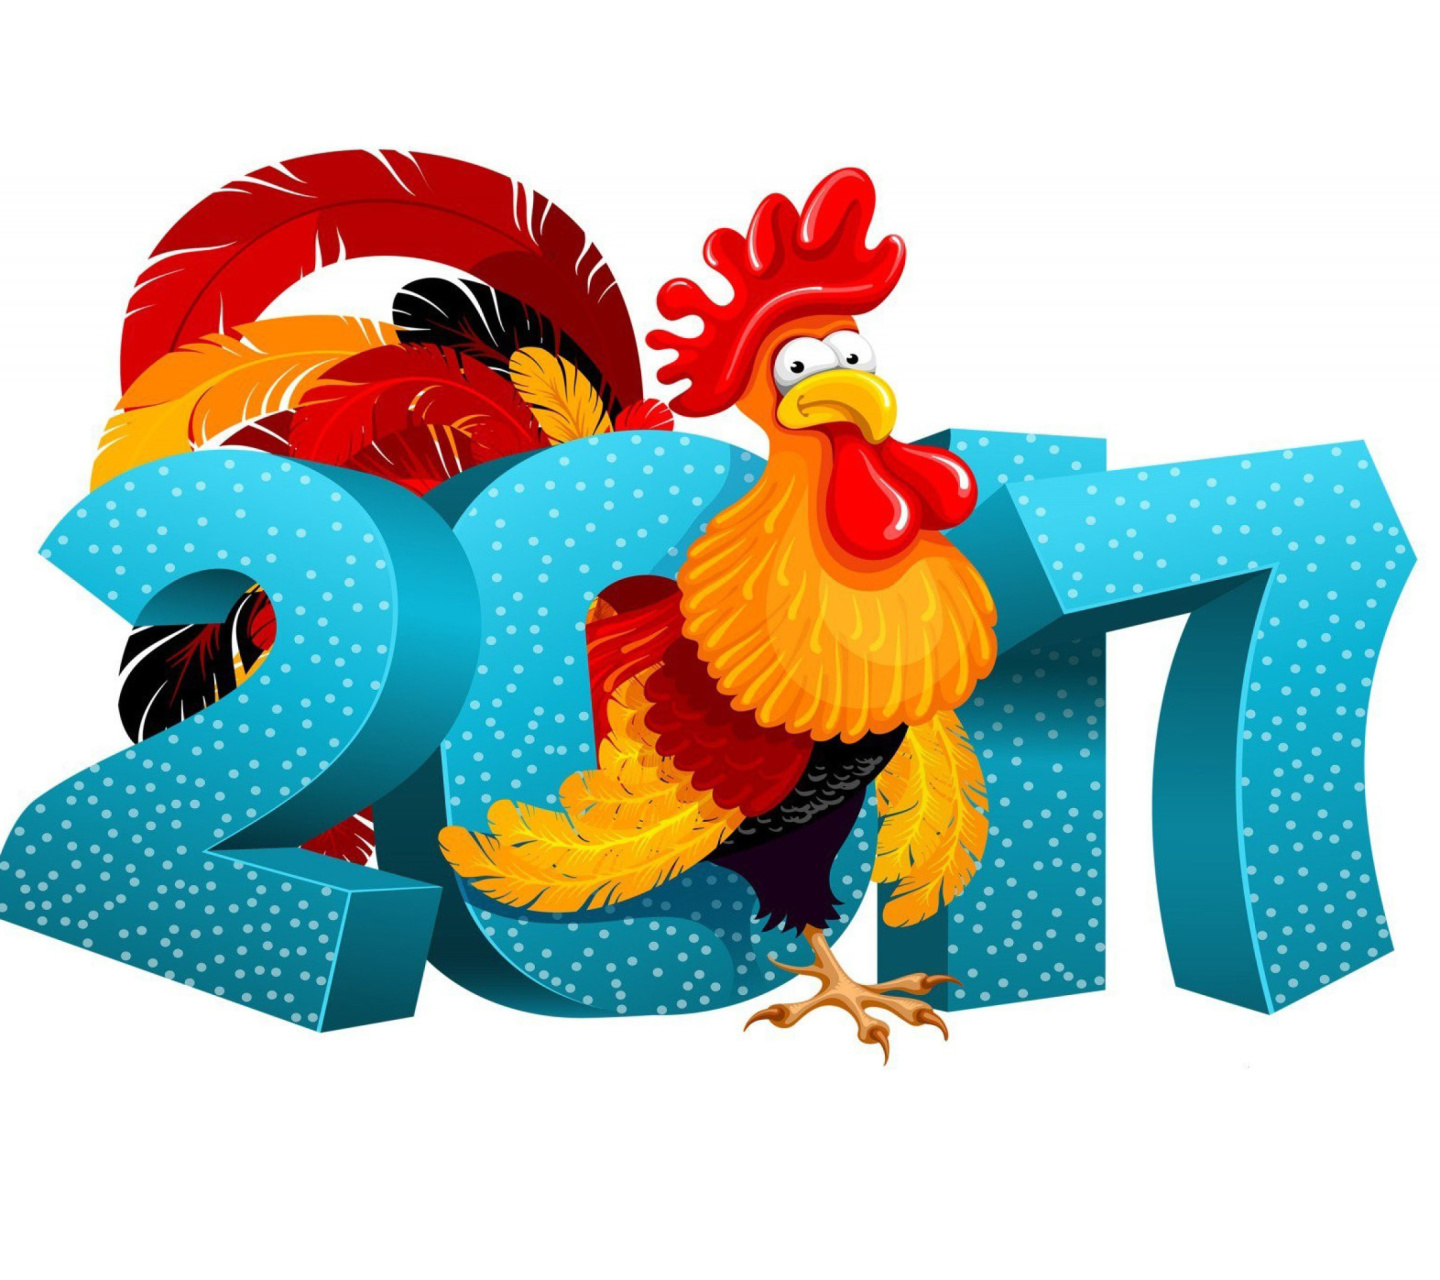 2017 New Year Chinese Horoscope Red Cock Rooster wallpaper 1440x1280